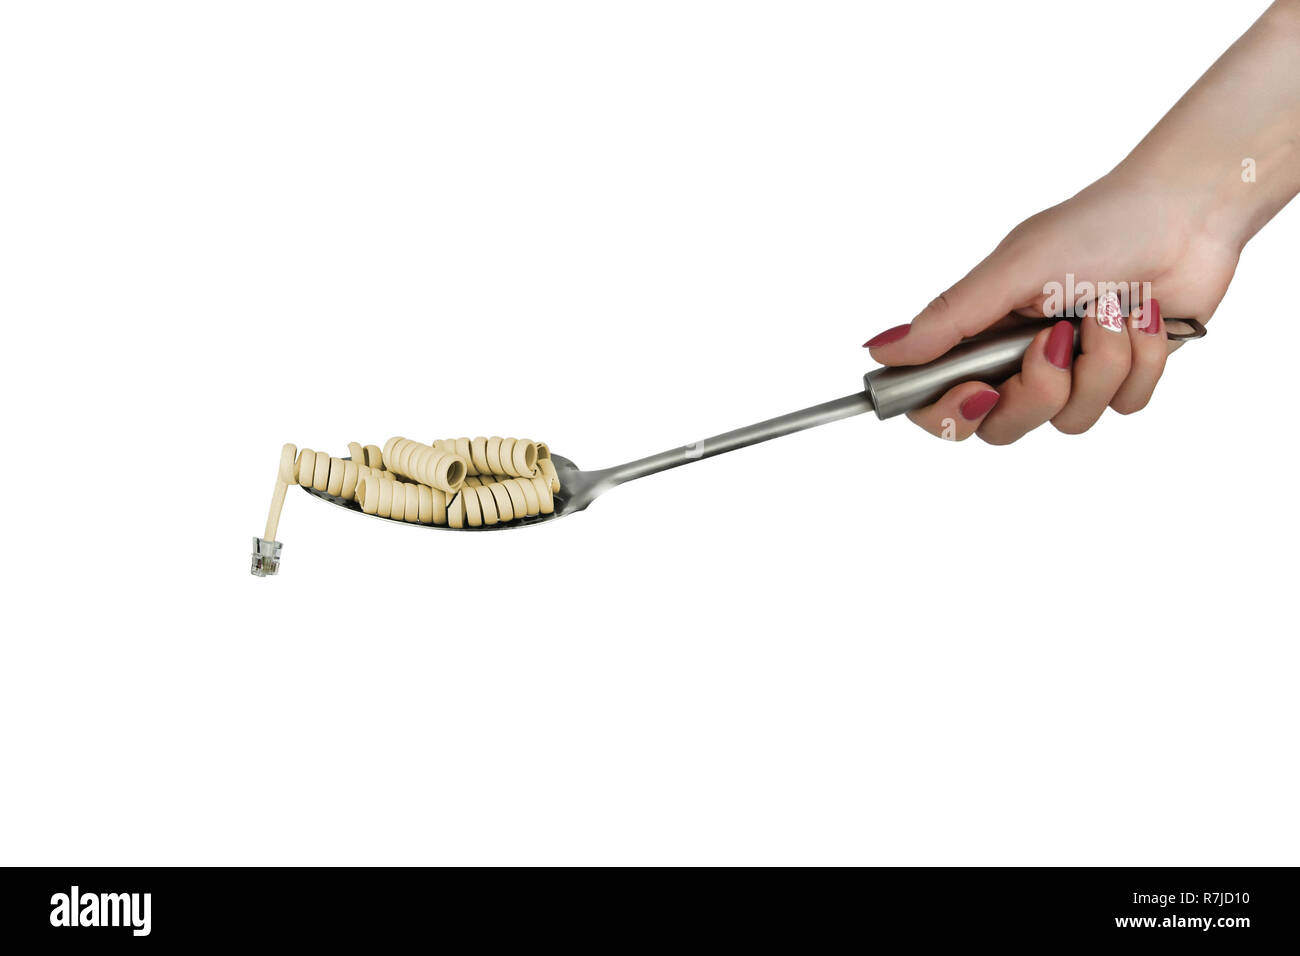 twisted the phone cord as pasta on a spoon Stock Photo